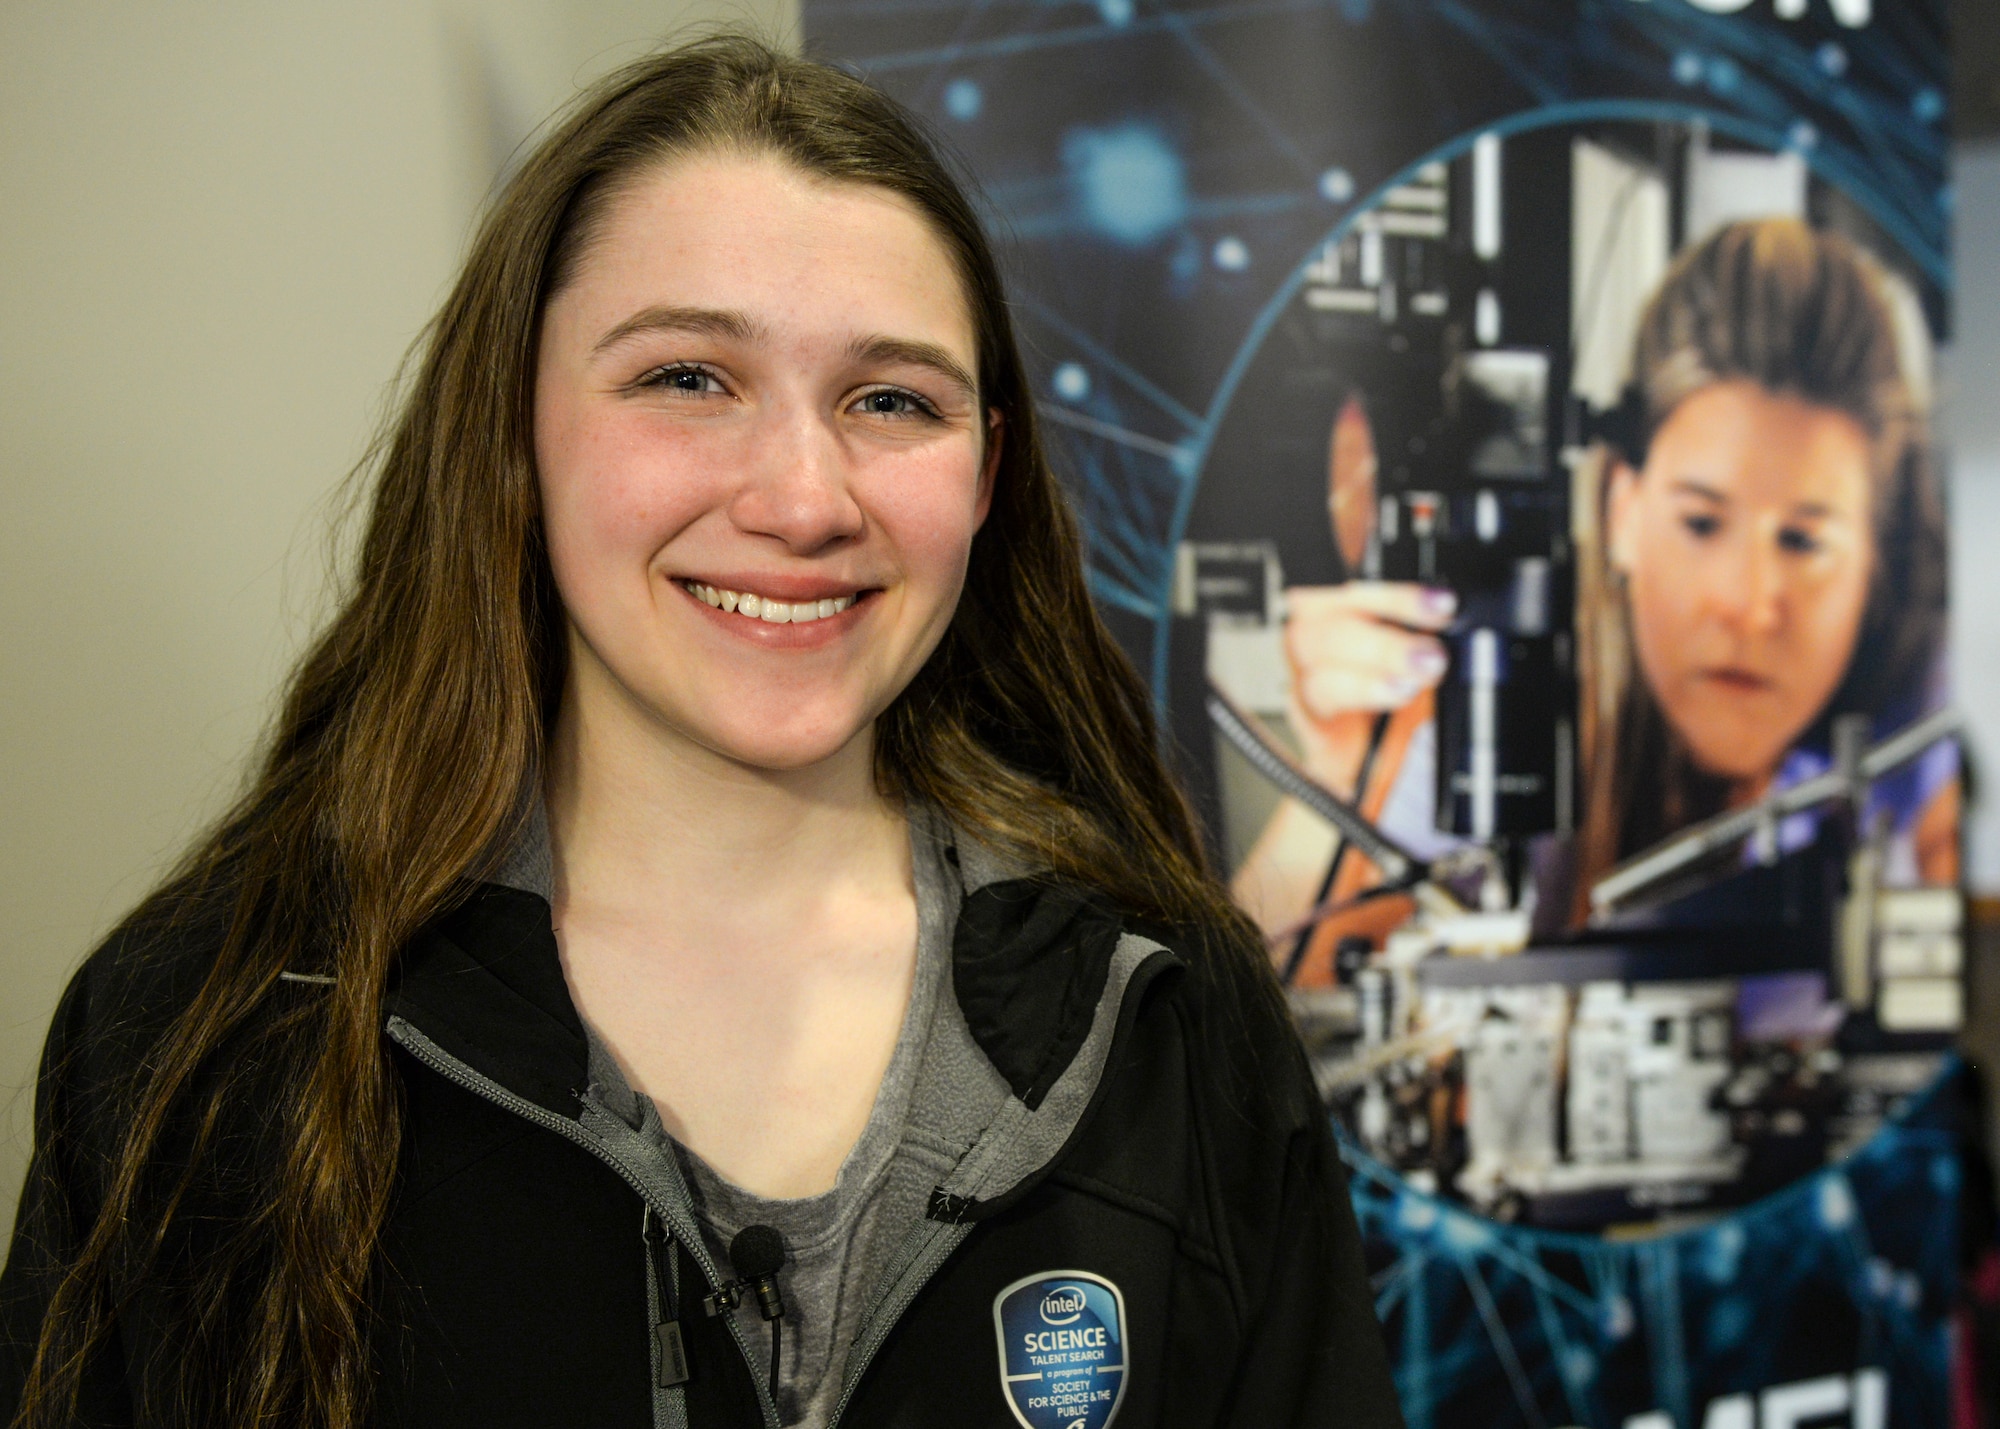 Paige Brown, 17, a senior at Bangor High School in Bangor, Maine, invented a device that absorbs phosphorous from storm water in the streams in her community. Her research was an environmental engineering project called ‘Constructing an Inexpensive Calcium Alginate-Based Scaffold for Phosphorous Sorption in Storm Water.” In March, Brown also won a First Place Medal of Distinction for Global Good and a $150,000 prize to continue her research as part of the Intel Science Talent Search 2016 competition for studying the water quality of six environmentally impaired local streams with high E. coli and phosphate contamination levels. (U.S. Air Force photo/Wesley Farnsworth)